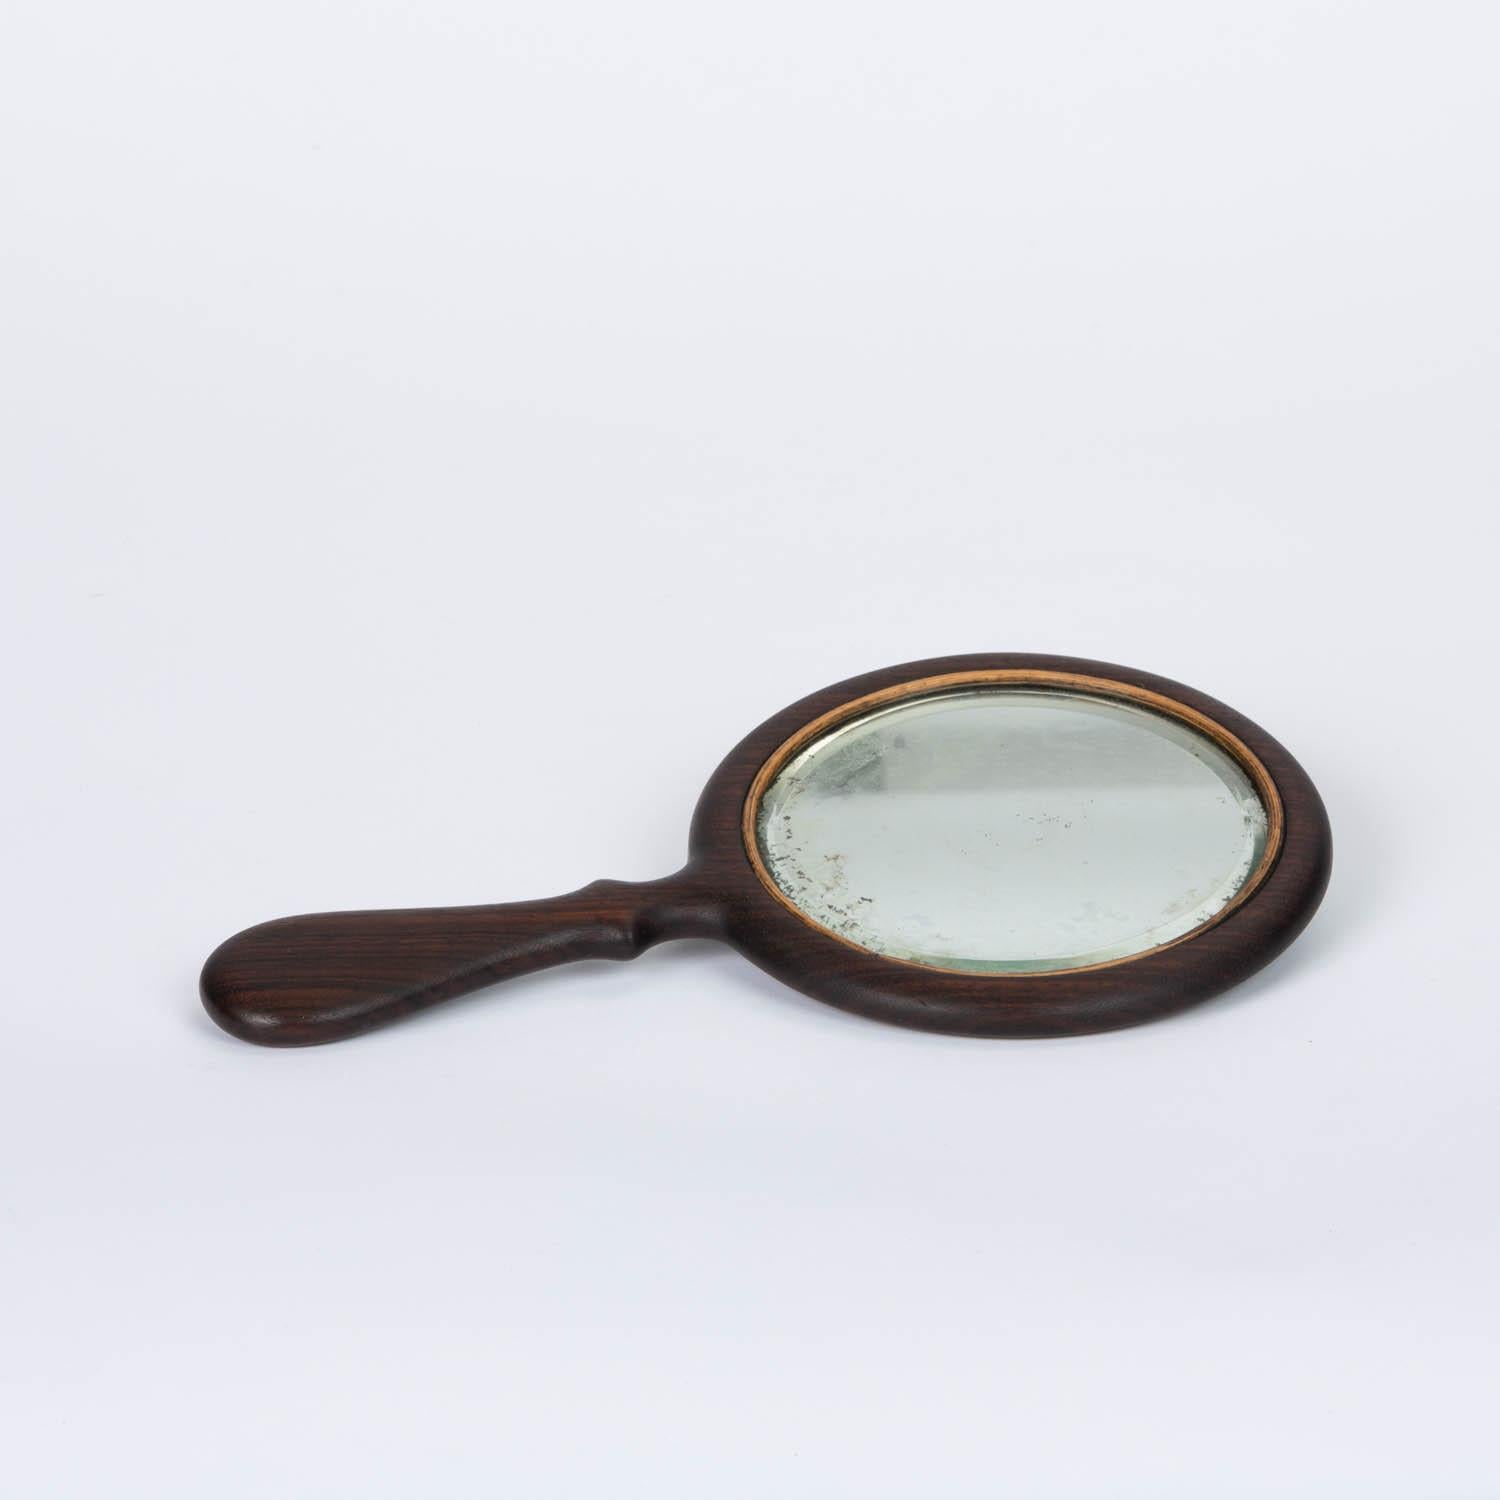 Vintage hand mirror featuring a patinated rosewood handle and frame and antiqued oxidation to the mirror glass.

Condition: Excellent Vintage condition, professionally refinished, age appropriate wear on wood finish and glass.

Measures: 5.25”